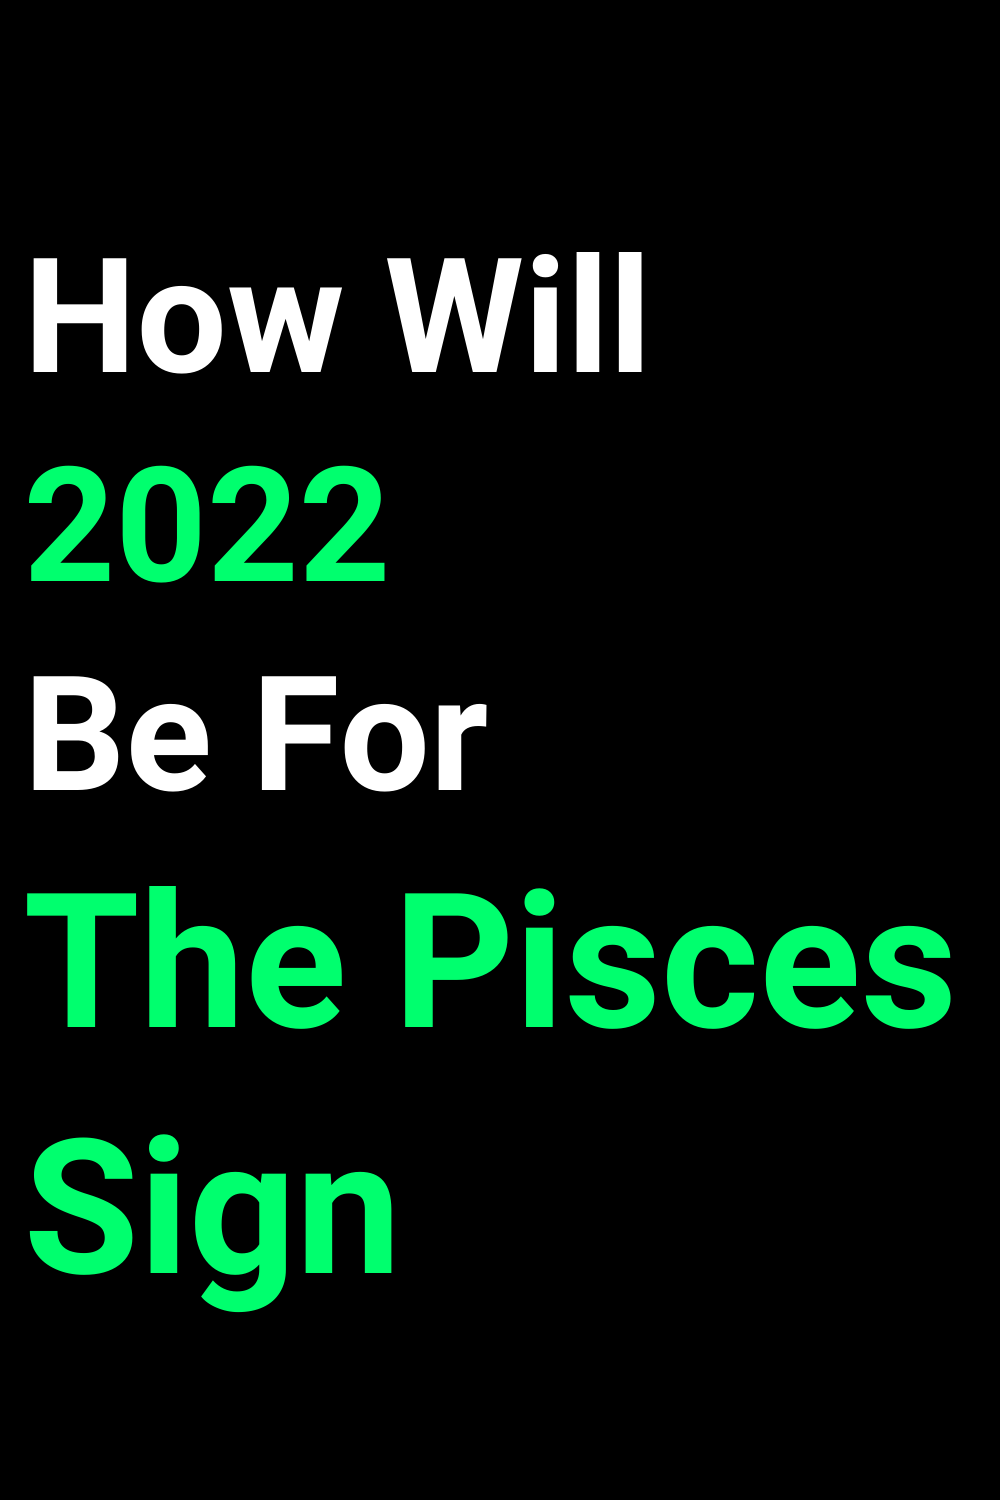 How Will 2022 Be For The Pisces Sign